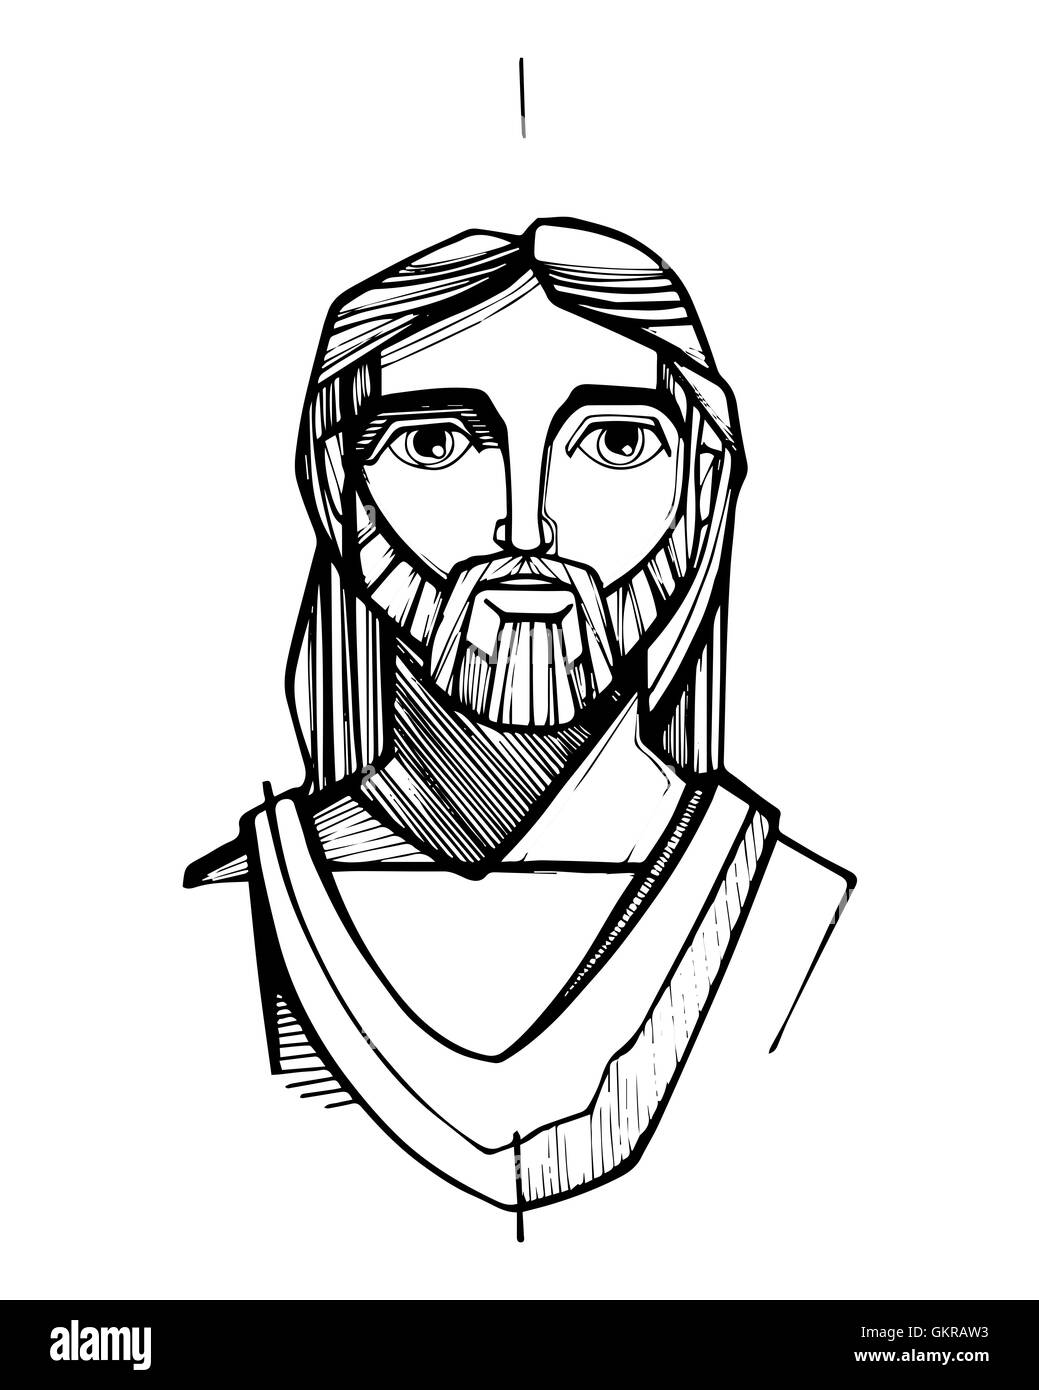 Hand drawn vector illustration or drawing of Jesus Christ Face Stock Photo